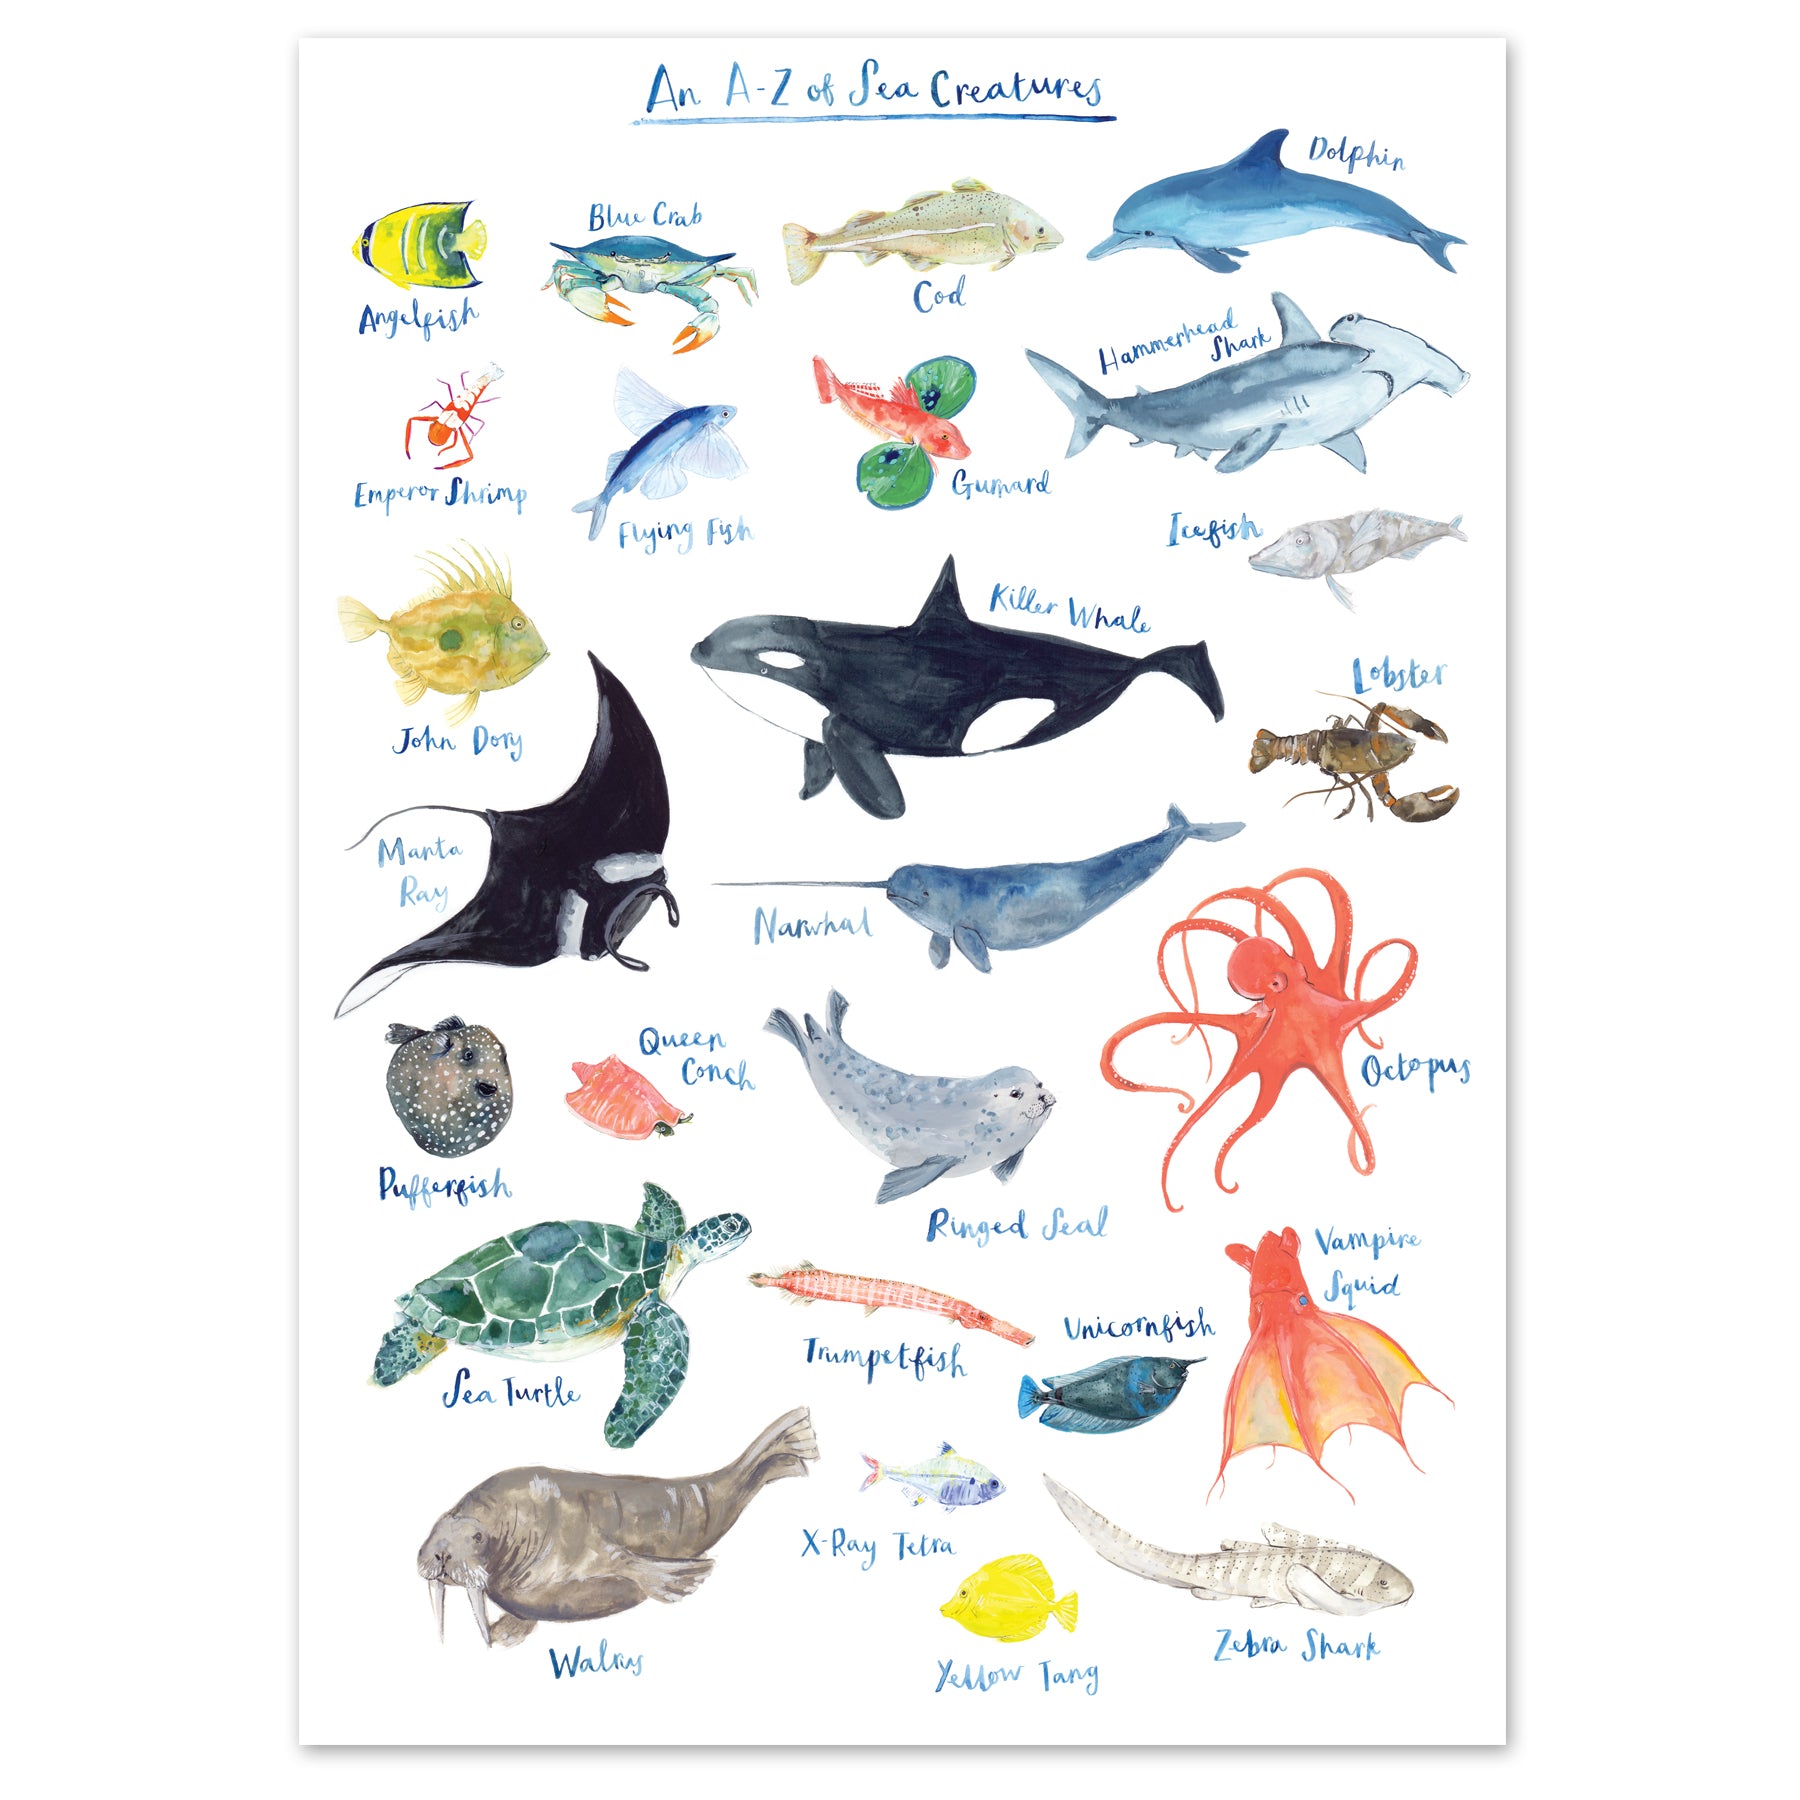 A3 A to Z of Sea Creatures Art Print by Fiona Purves | Curiouser